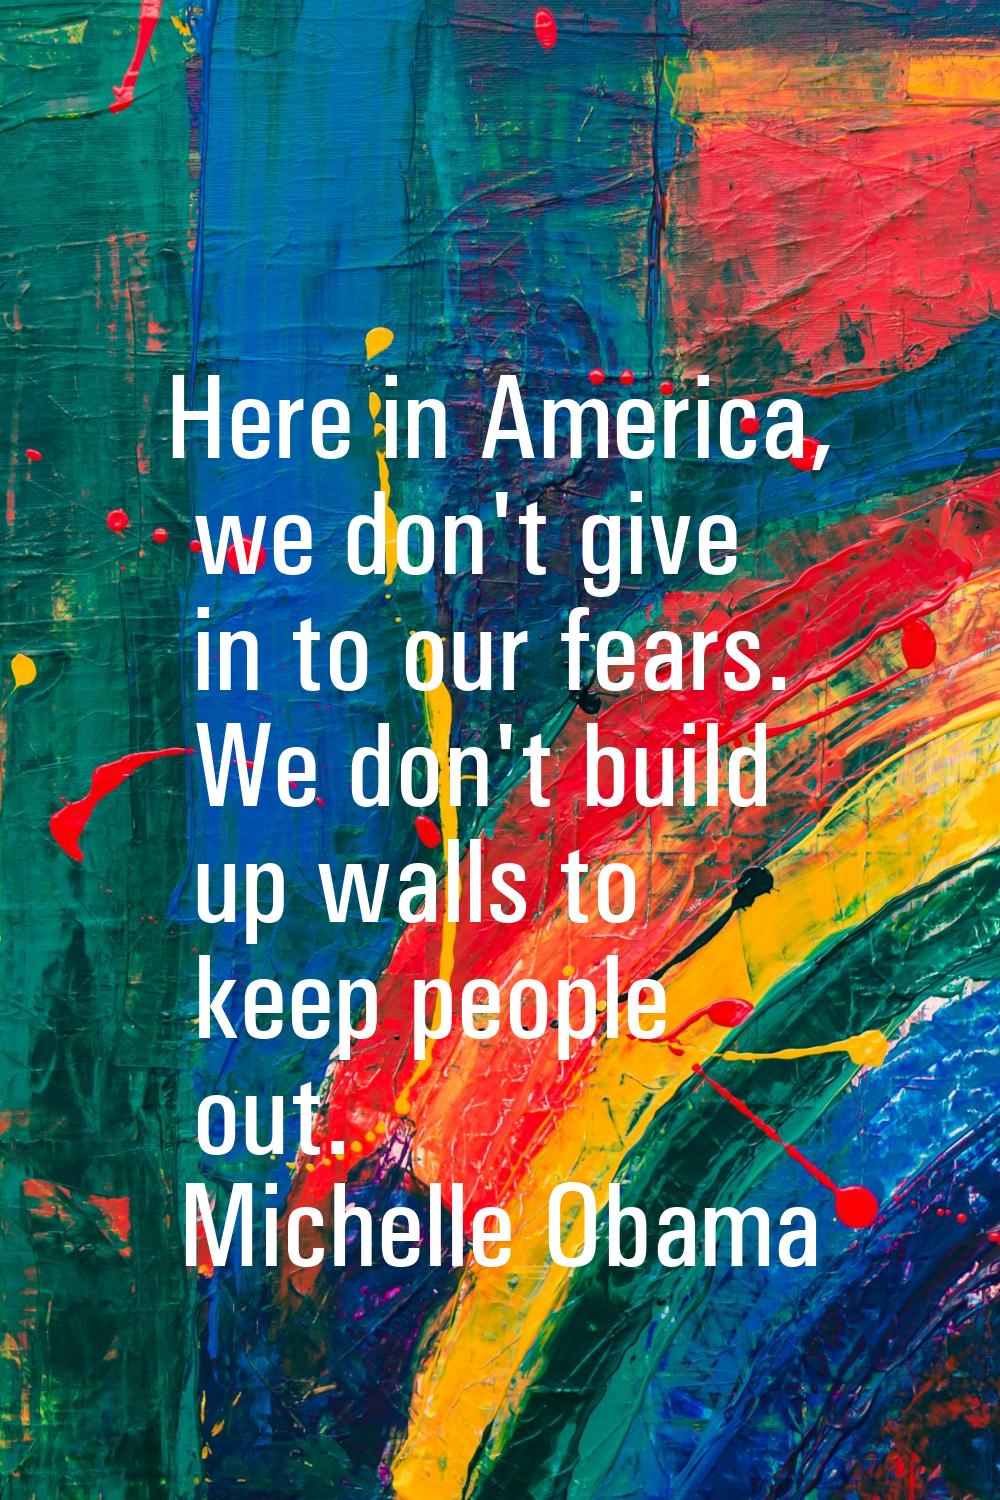 Here in America, we don't give in to our fears. We don't build up walls to keep people out.